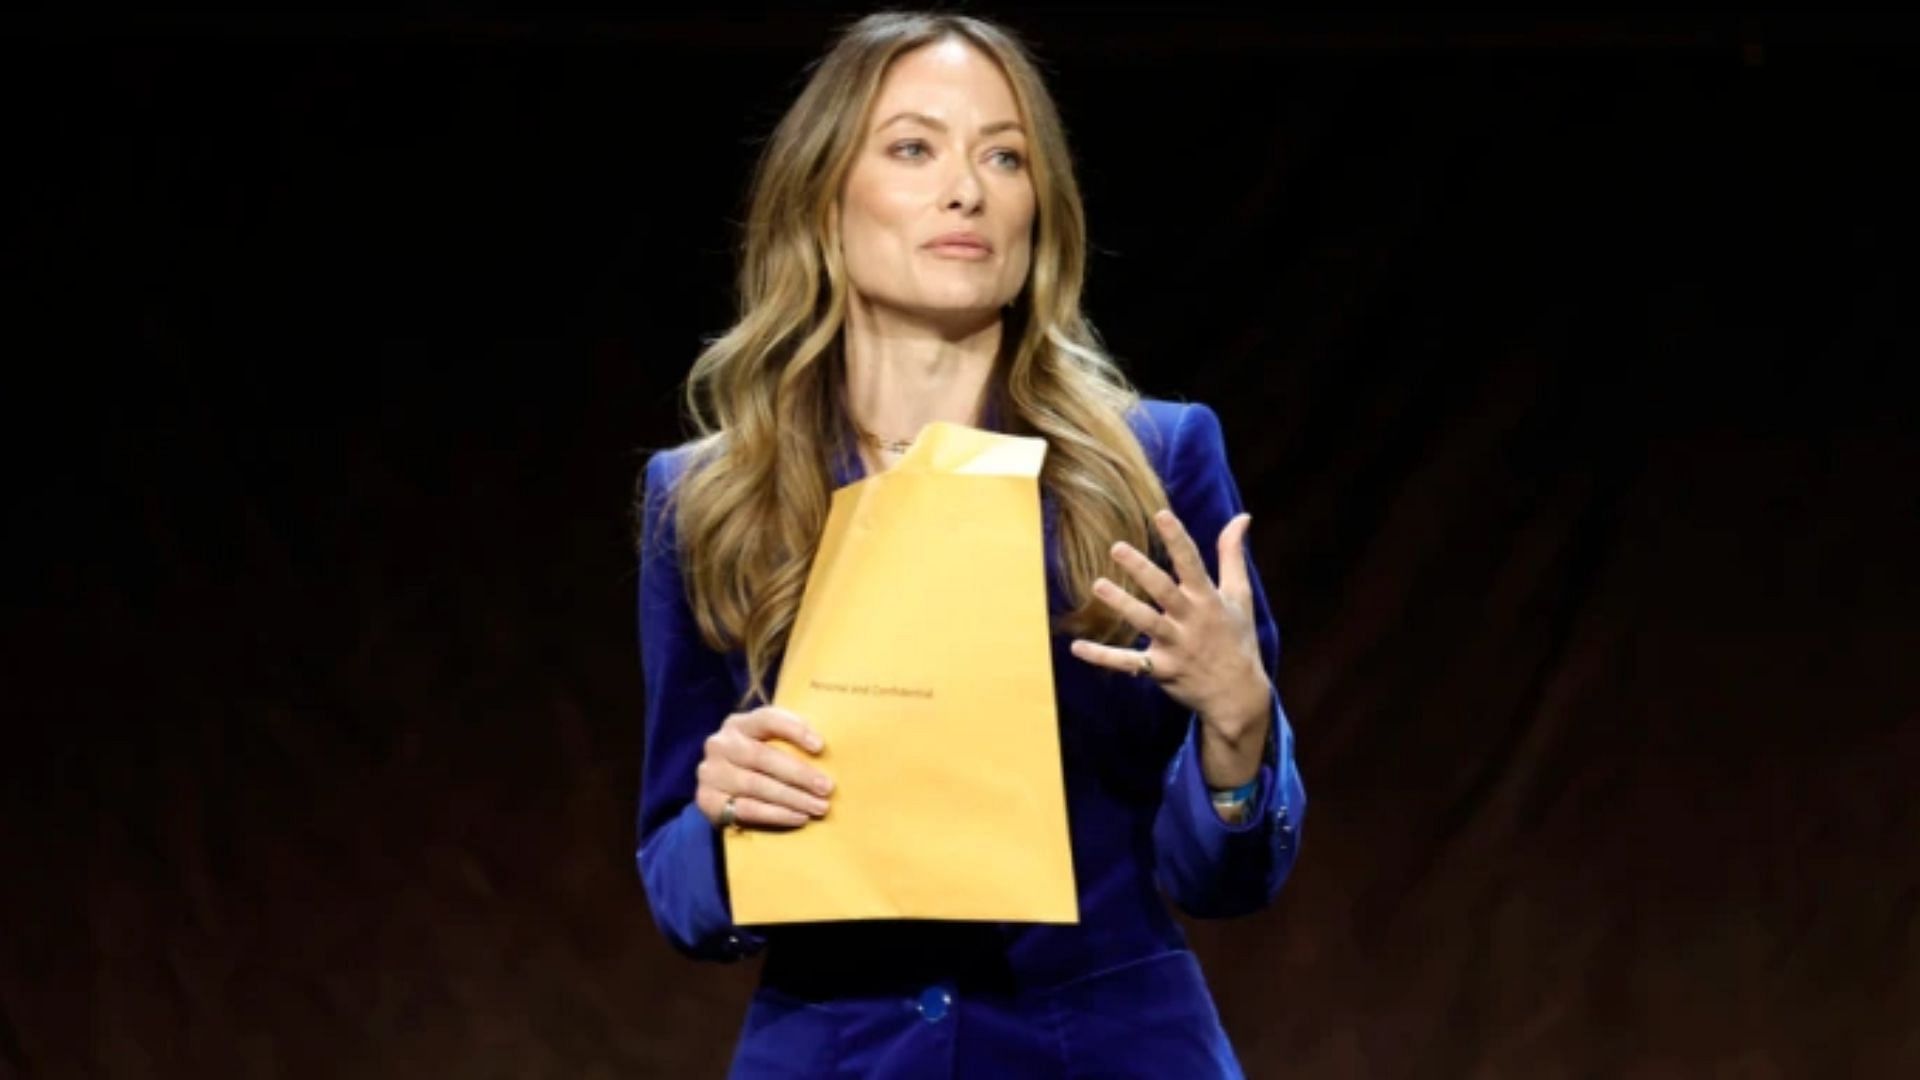 Olivia Wilde holding the legal papers during her Cinema Con presentation. (Image via Getty Images/Frazer Harrison)